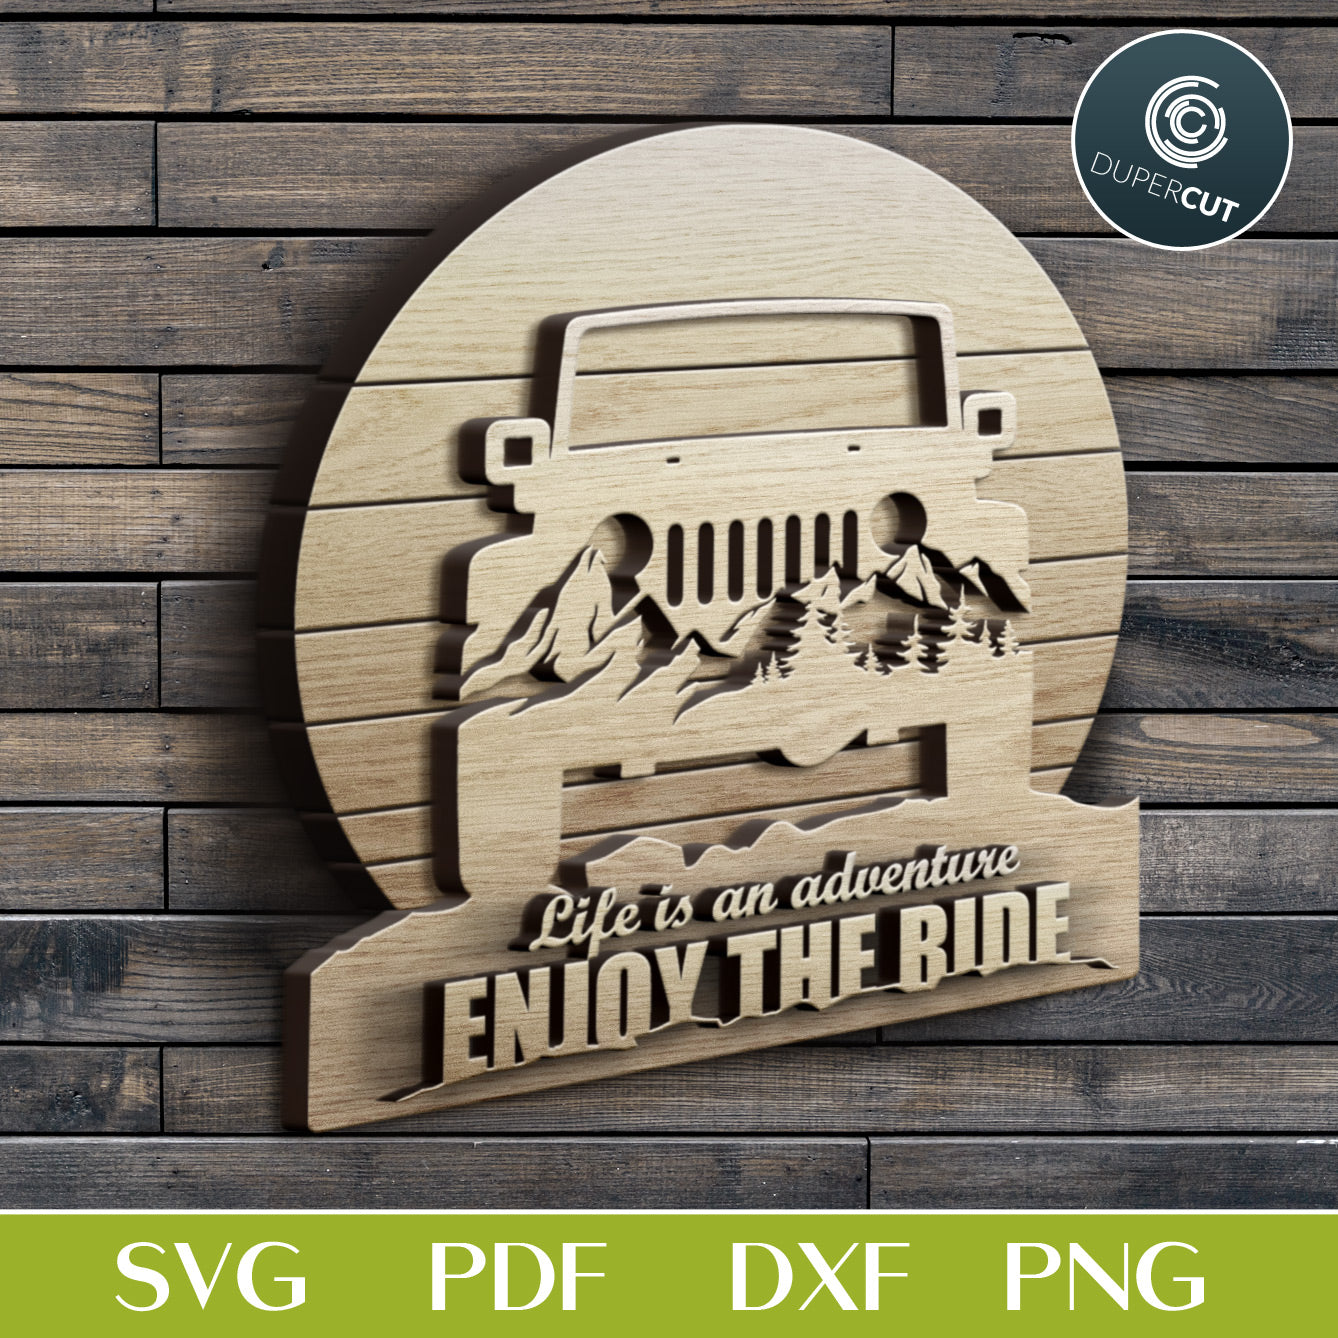 Jeep SUV custom text sign - layered files for laser cutting, printing, sublimation. Use with Glowforge, Cricut, Silhouette Cameo, CNC machines